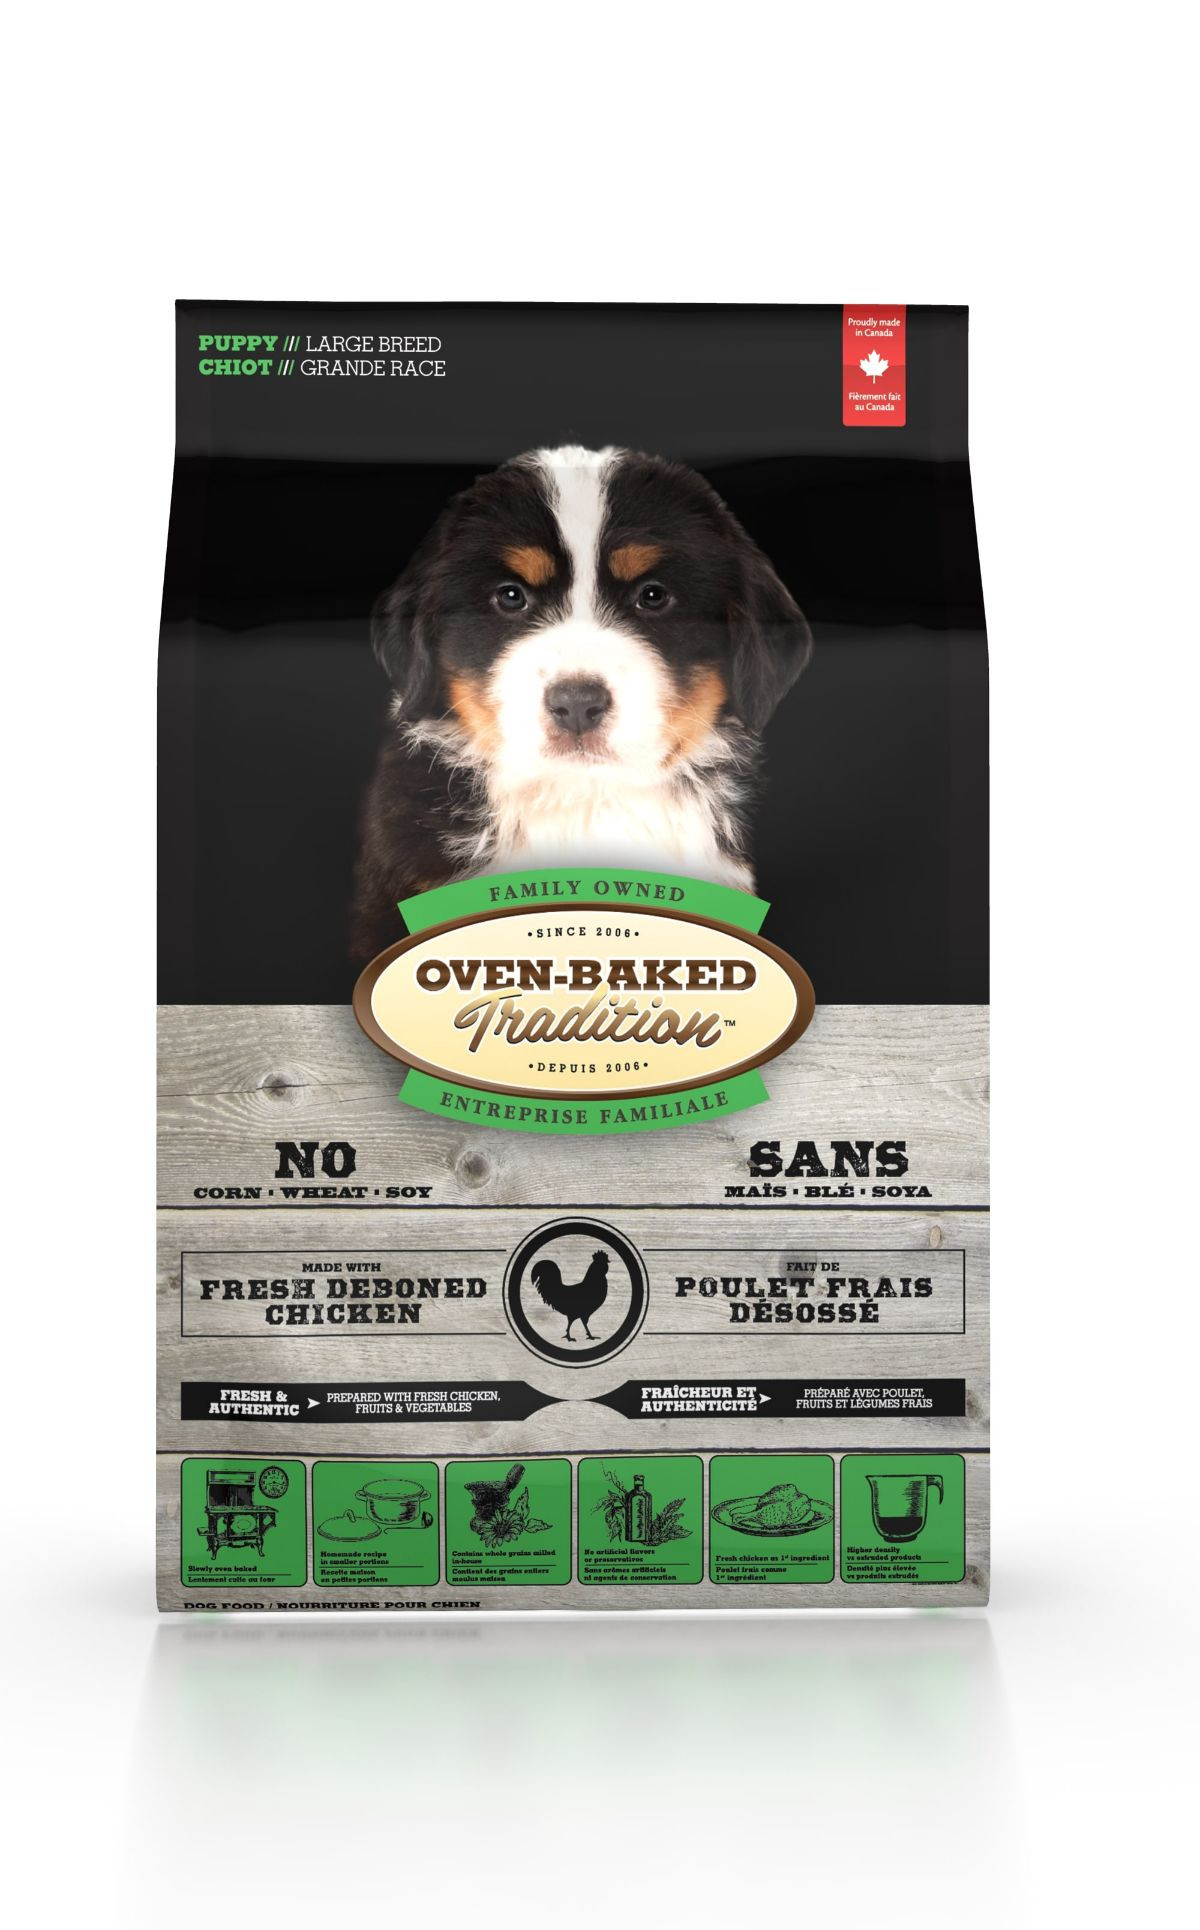 Oven-Baked Tradition Puppy Large Breed Chicken hondenvoer